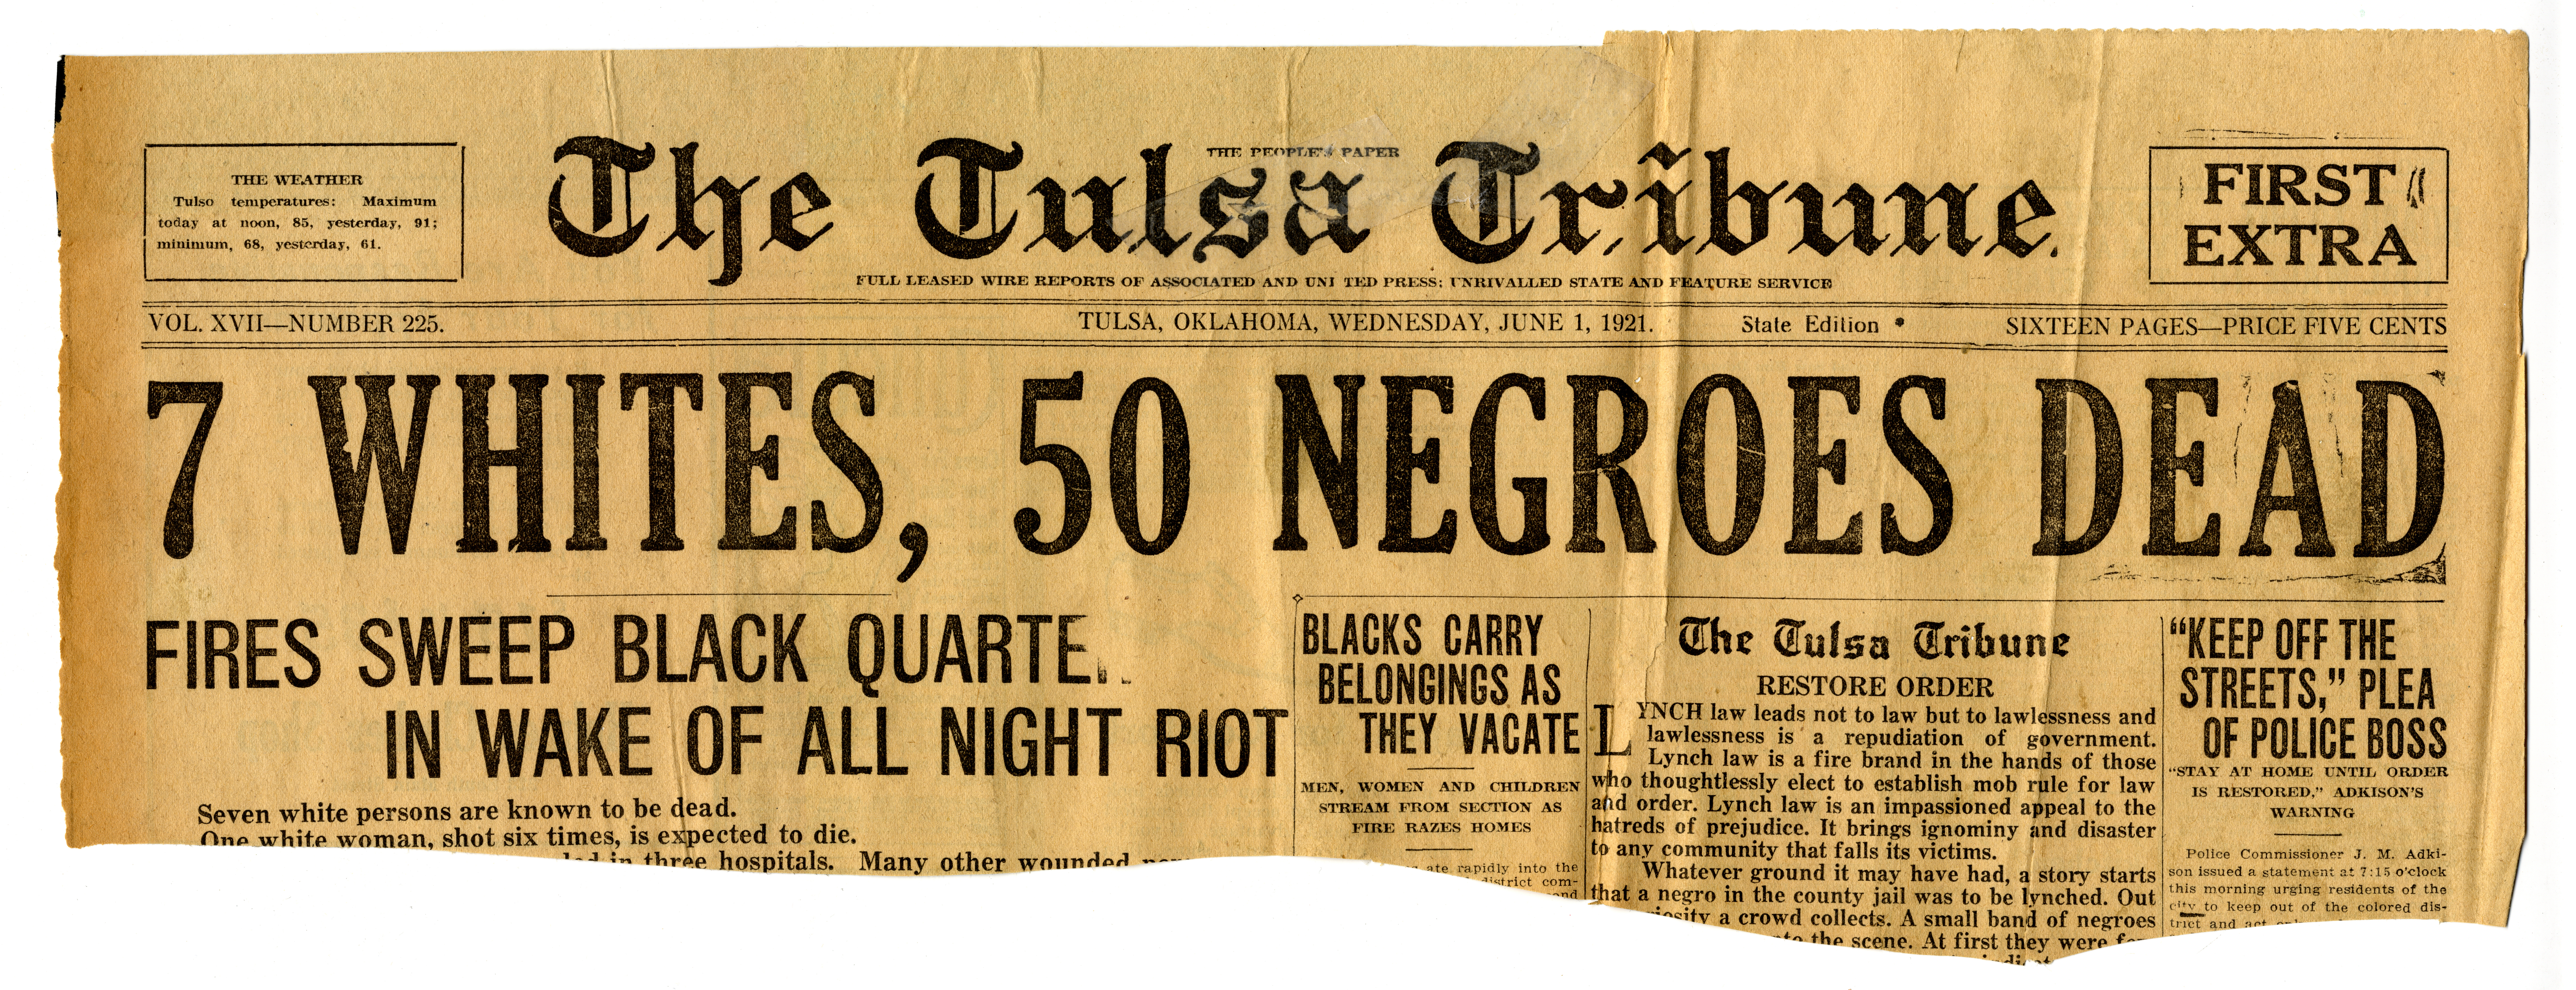 Partial clipping of the top headline of the June 1, 1921 First Extra edition of The Tulsa Tribune. Headlines read "7 WHITES, 50 NEGROES DEAD," "FIRES SWEEP BLACK QUARTER IN WAKE OF ALL NIGHT RIOT," "BLACKS CARRY BELONGINGS AS THEY VACATE" and "'KEEP OFF THE STREETS,' PLEA OF POLICE BOSS"